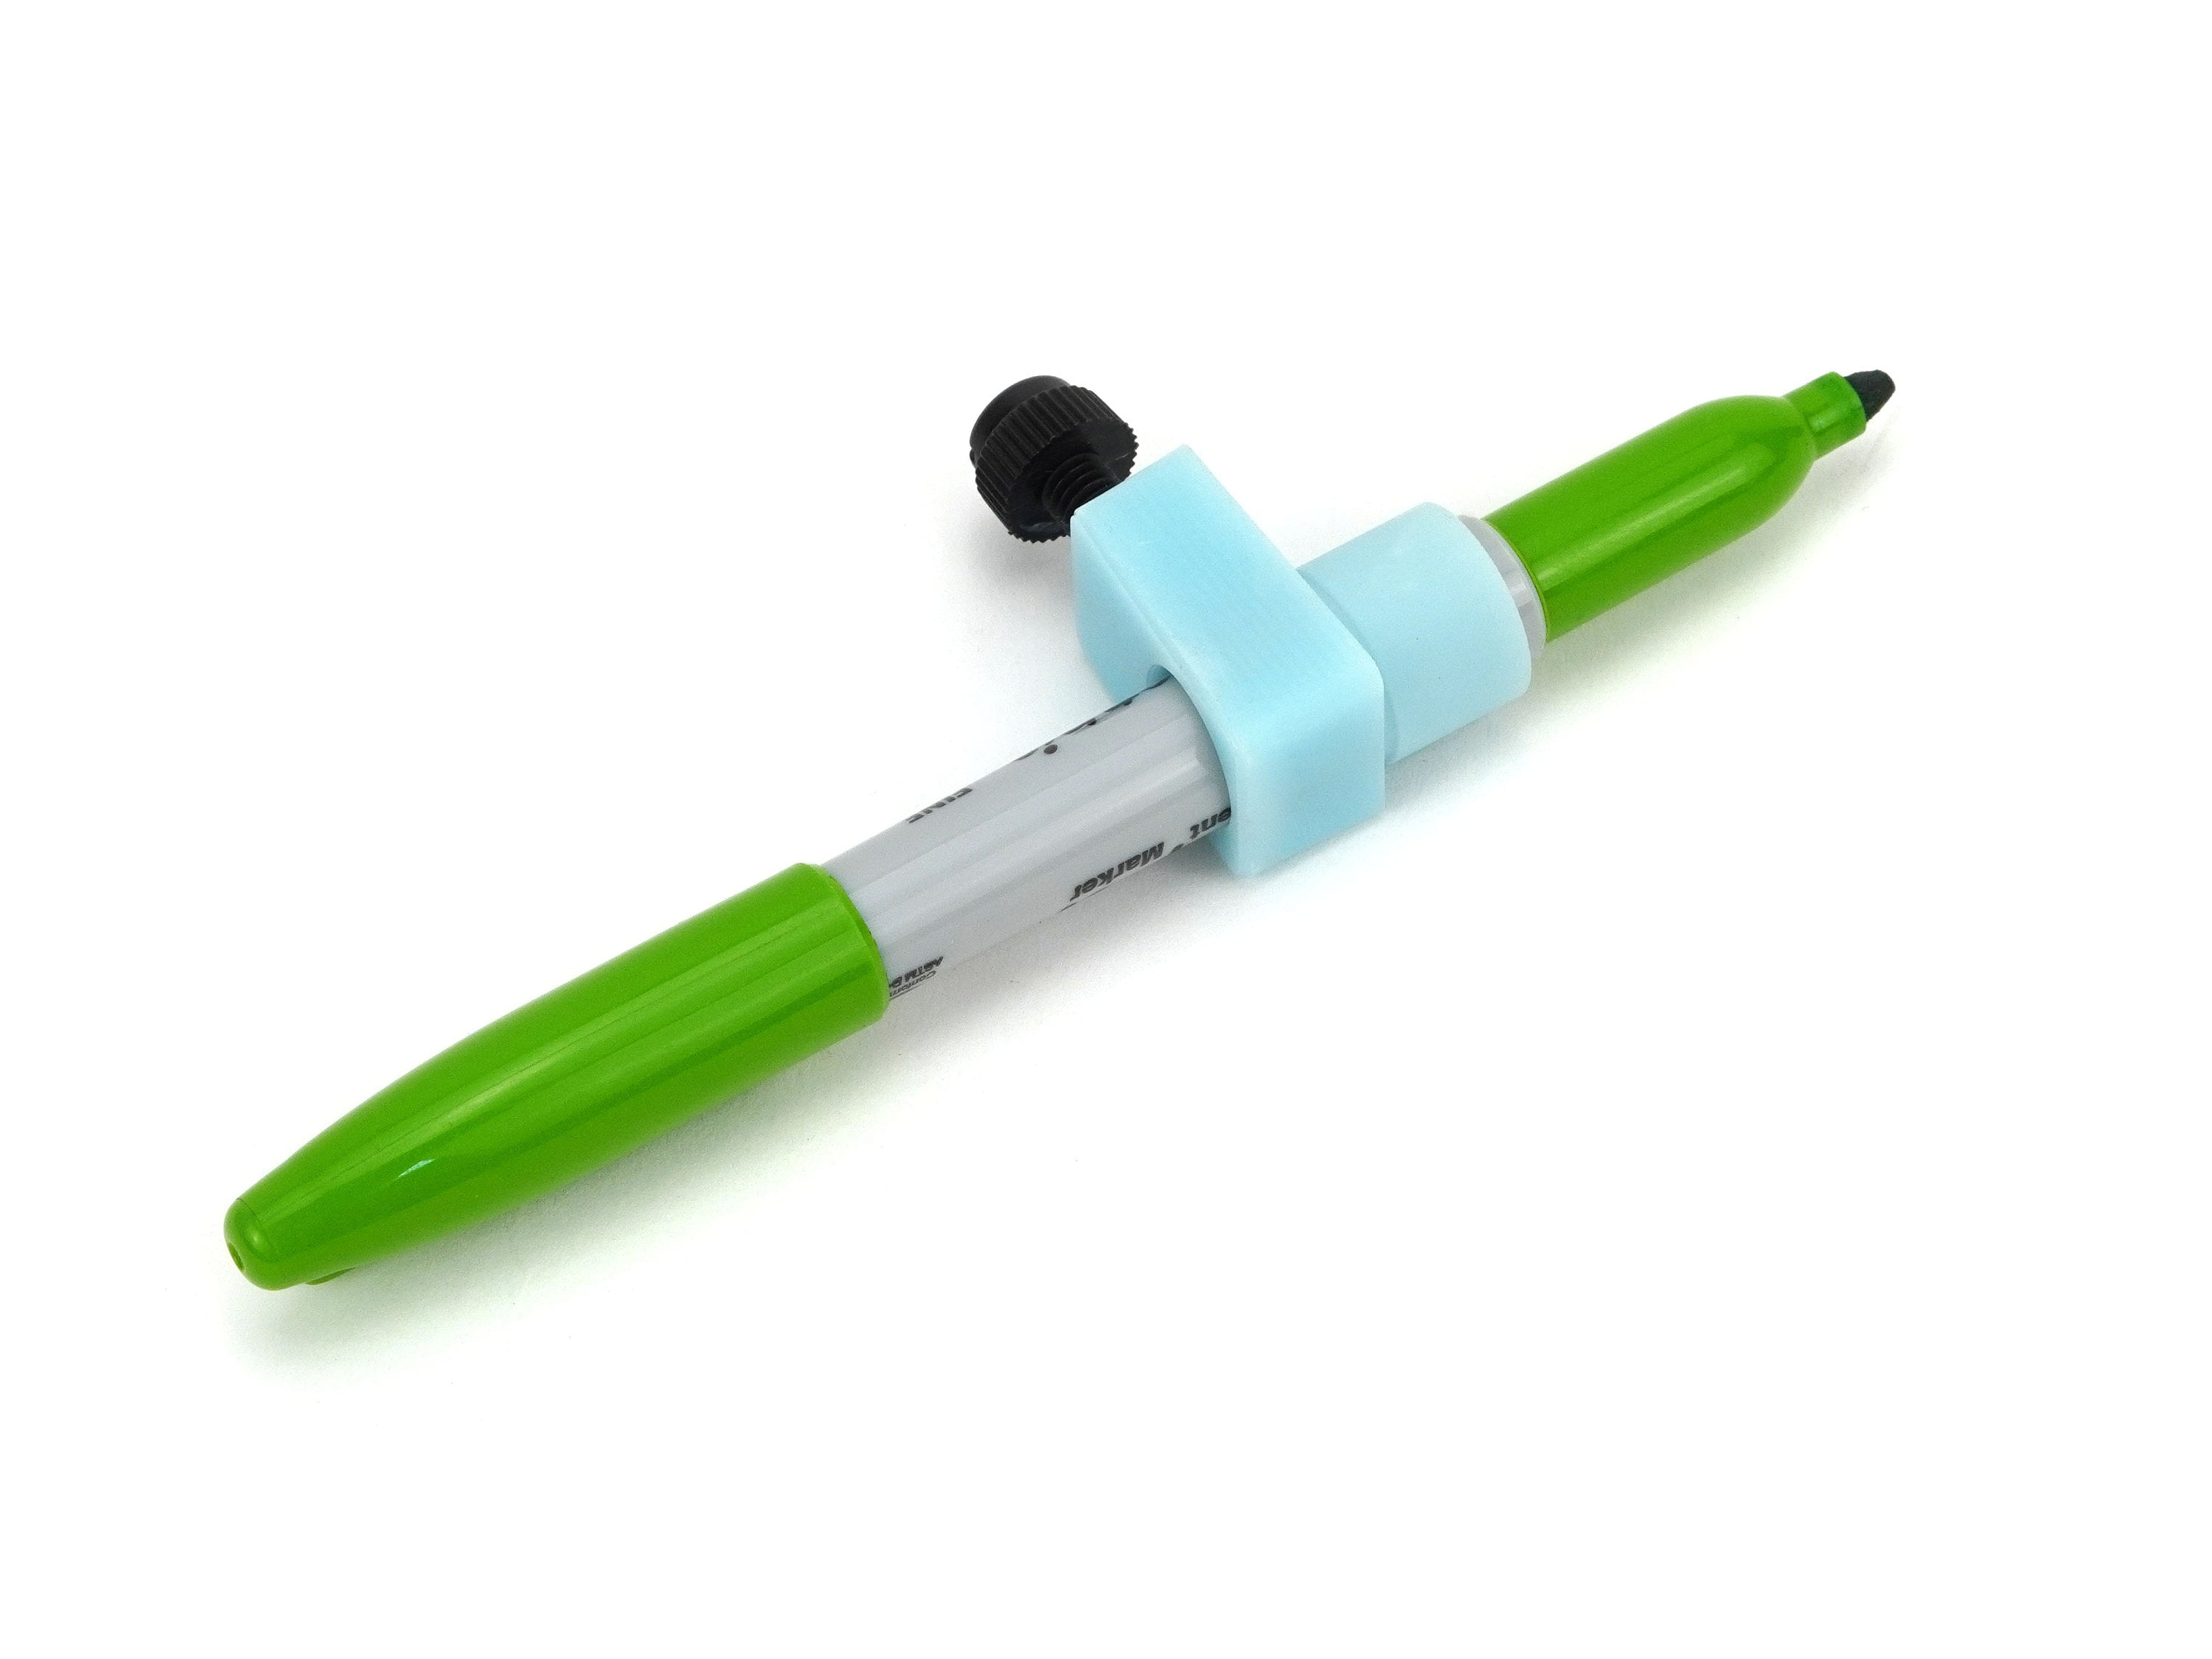 Paper Mate Flair Pen & Inkjoy Gel Pen Adapters for Cricut Machines